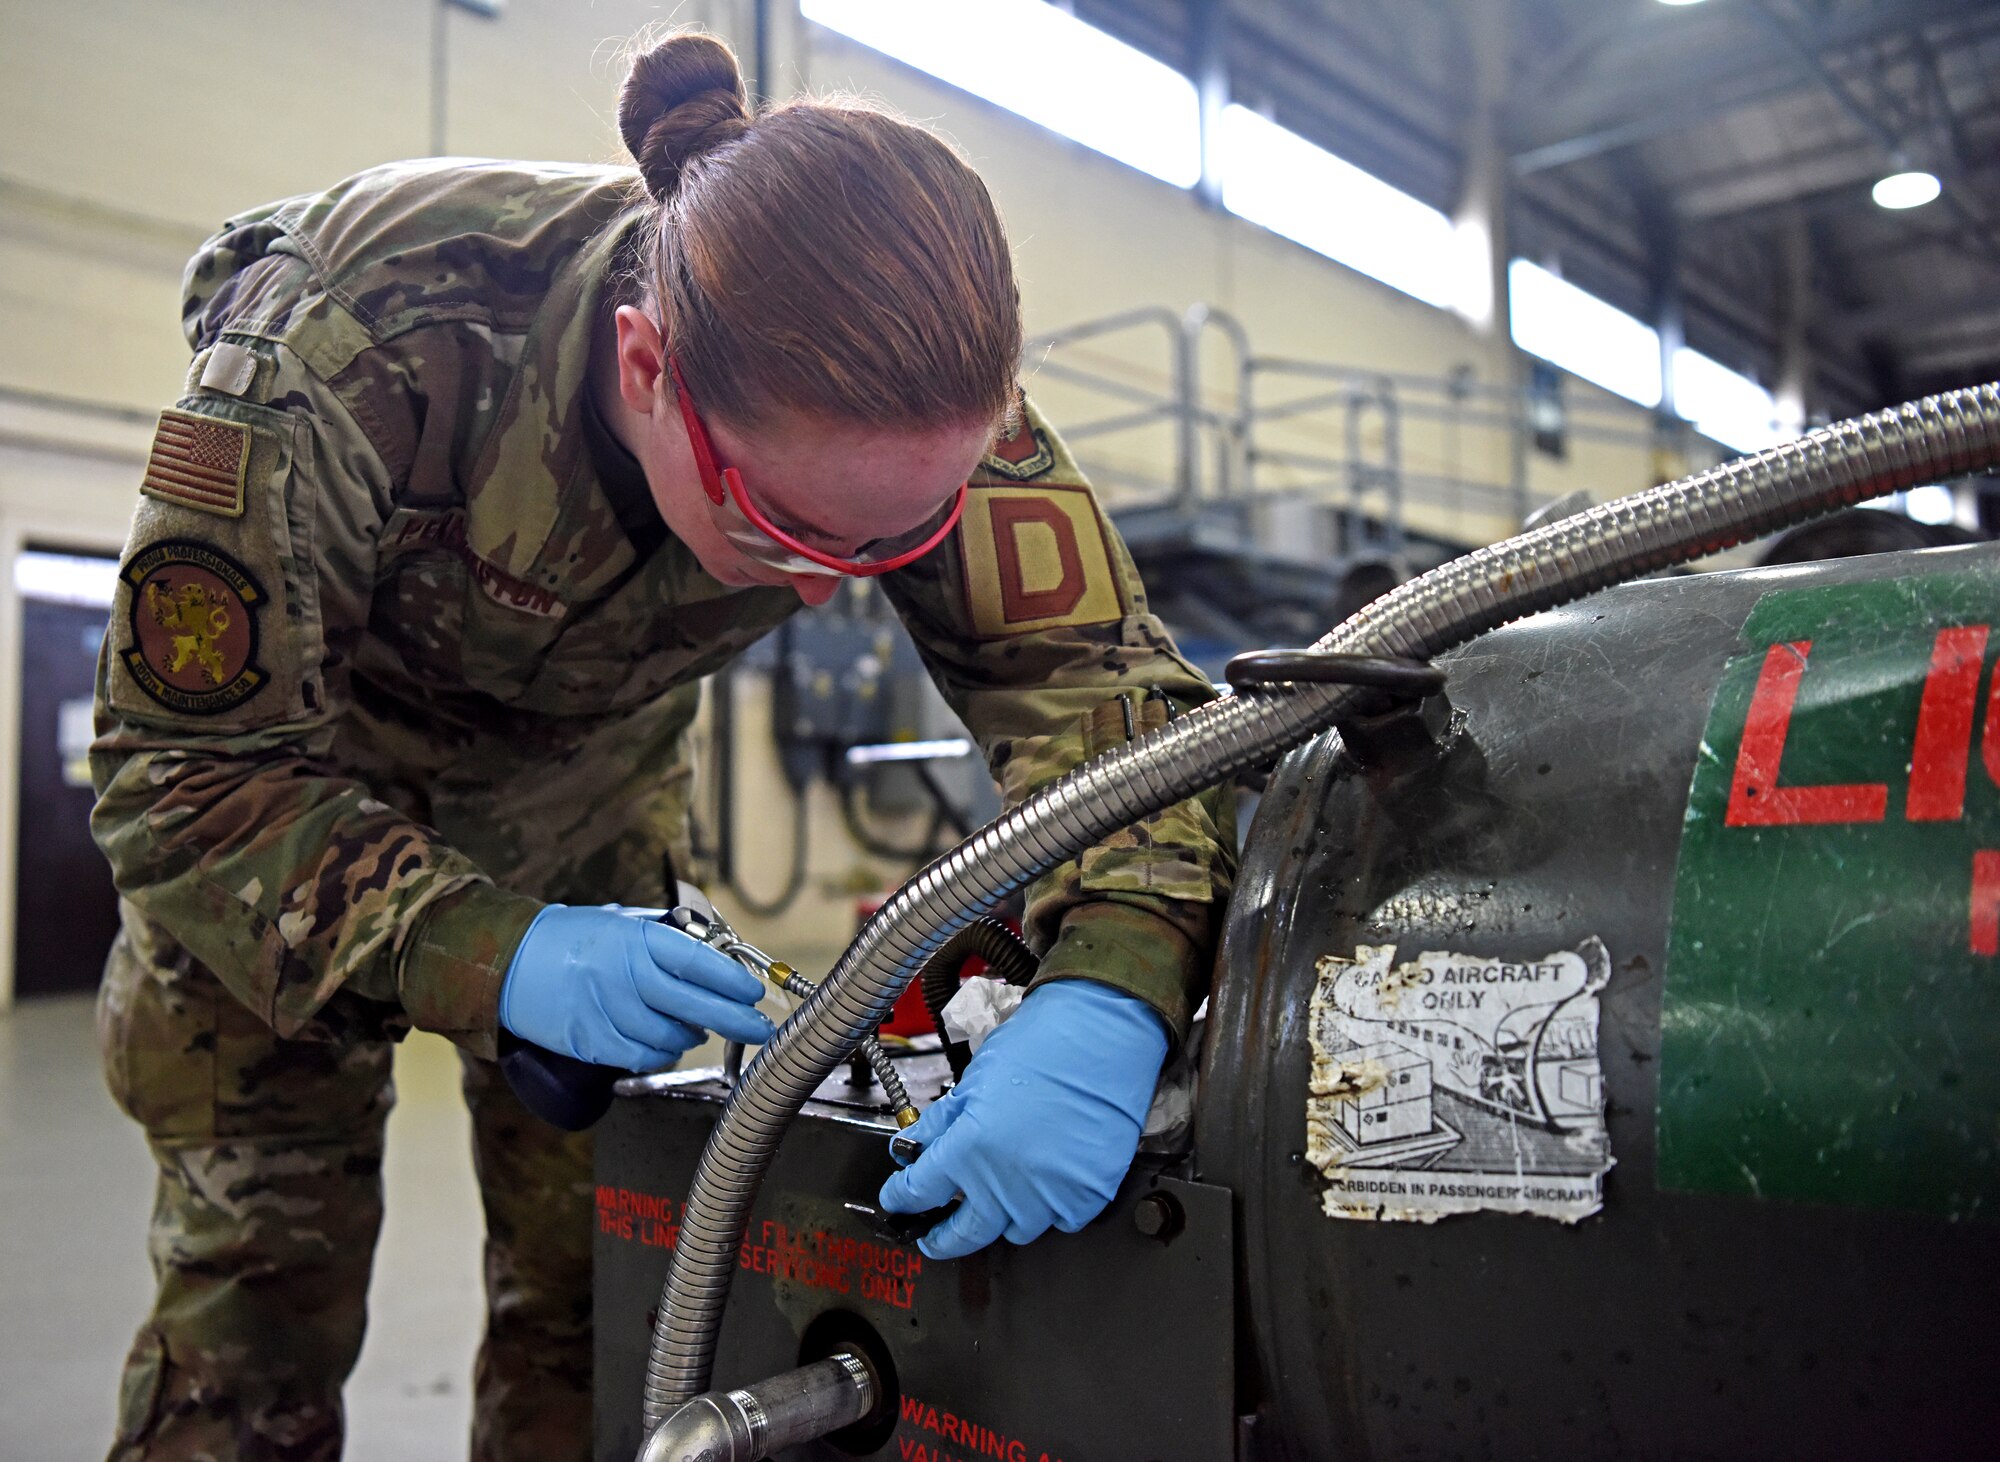 Airman 1st Class Rachael Pennington, 100th Maintenance Squadron aerospace ground equipment technician, lubricates a liquid oxygen tank at RAF Mildenhall, England, Oct. 23, 2019. AGE inspects hundreds of pieces of equipment which are essential to ensuring an aircraft’s mission readiness. (U.S. Air Force photo by Senior Airman Brandon Esau)